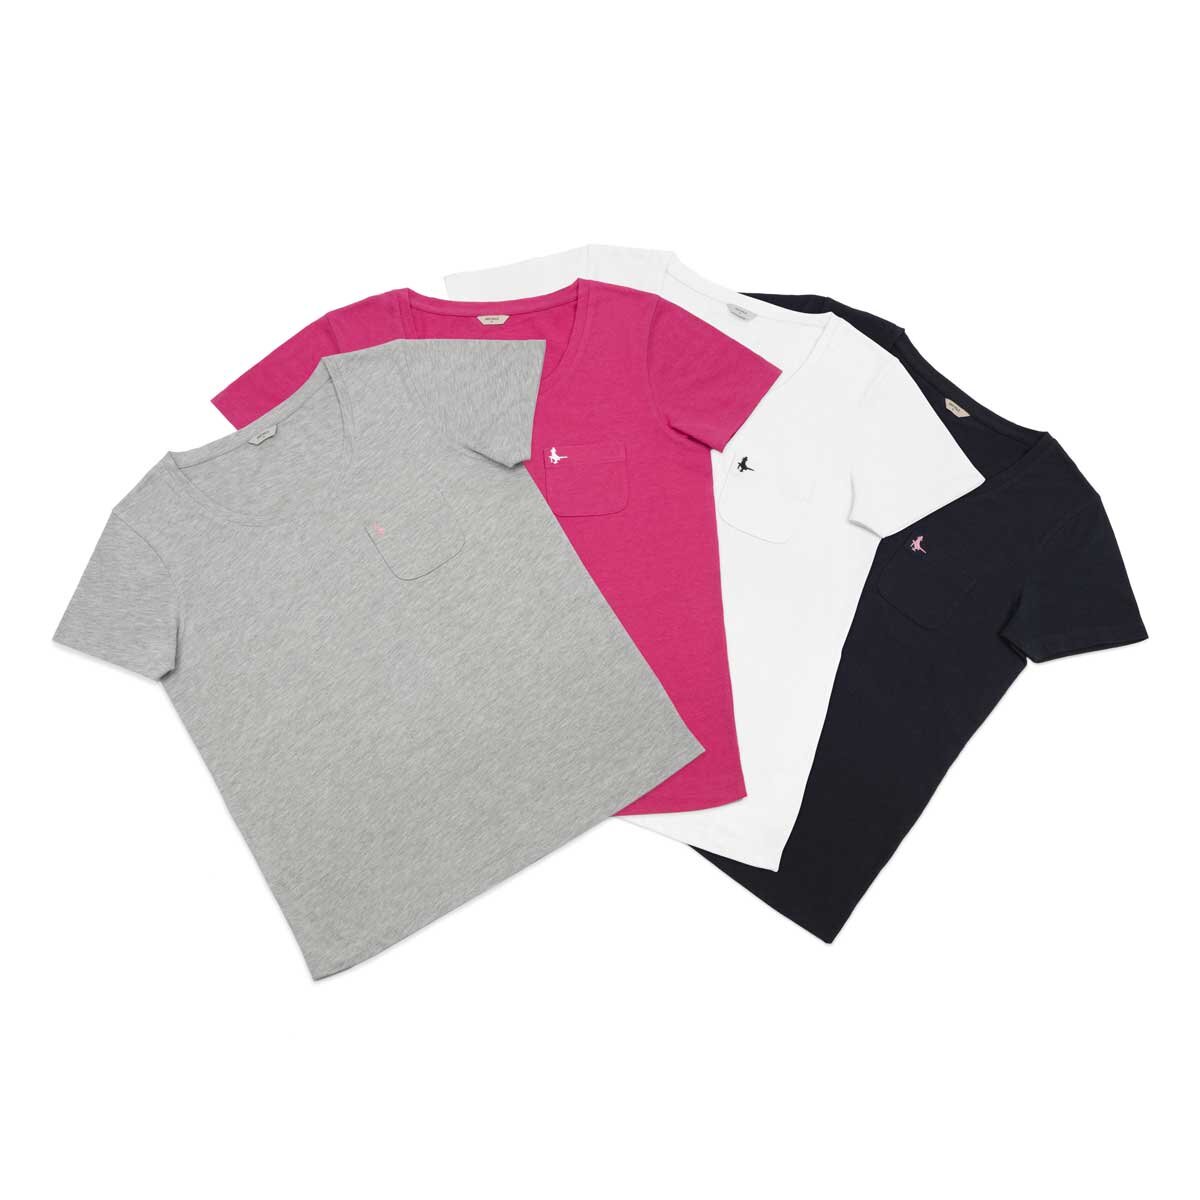 Jack Wills Ladies Fullford T-Shirt with Pocket in 4 Colours & 5 Sizes